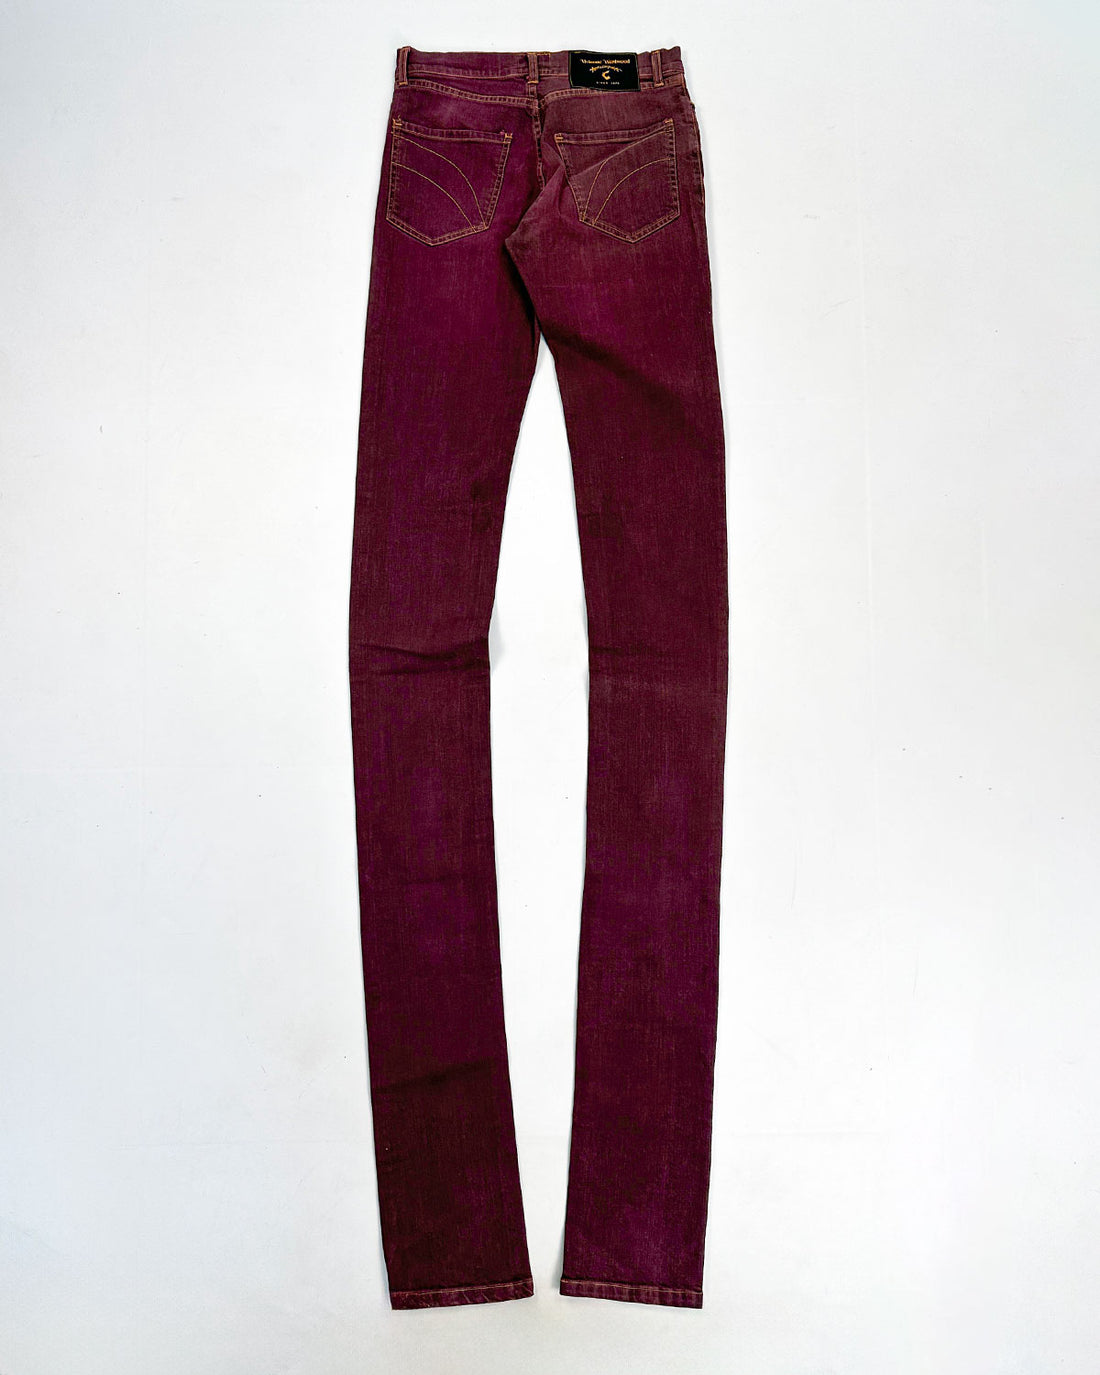 Vivienne Westwood Anglomania Extra-Long Burgundy Pants 1990's